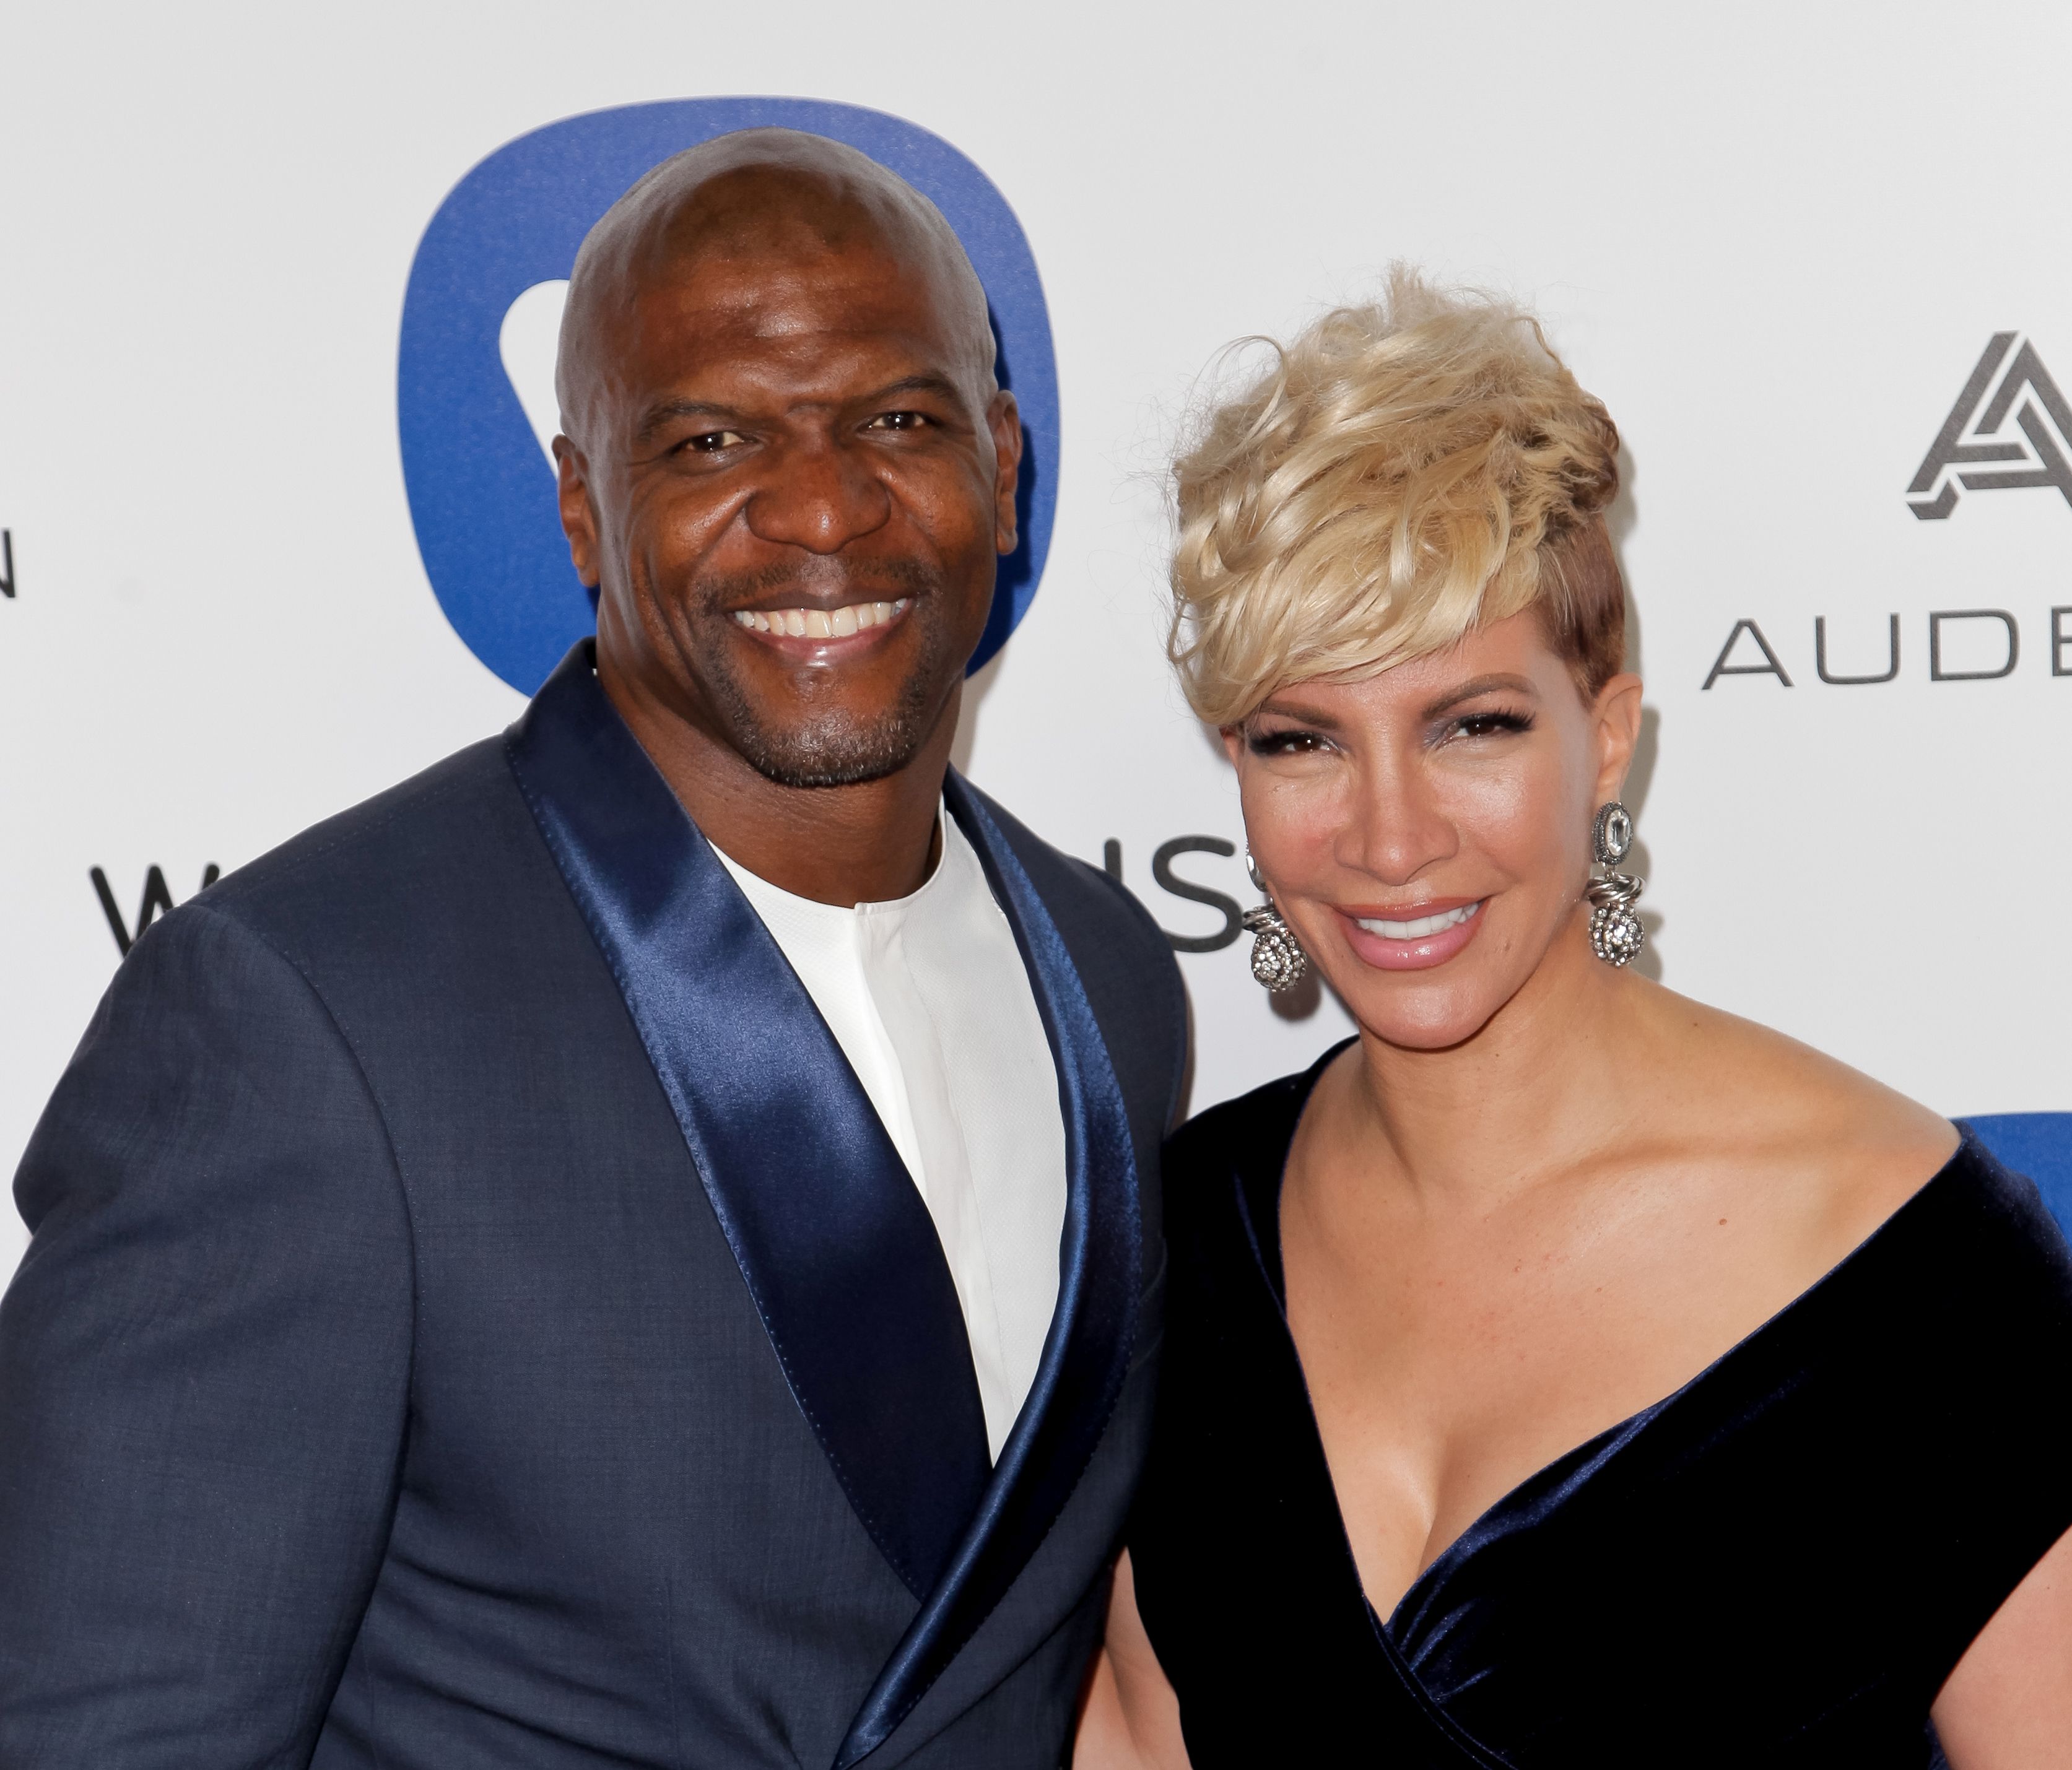 Terry Crews Says Wife's Race Makes People Question His Blackness